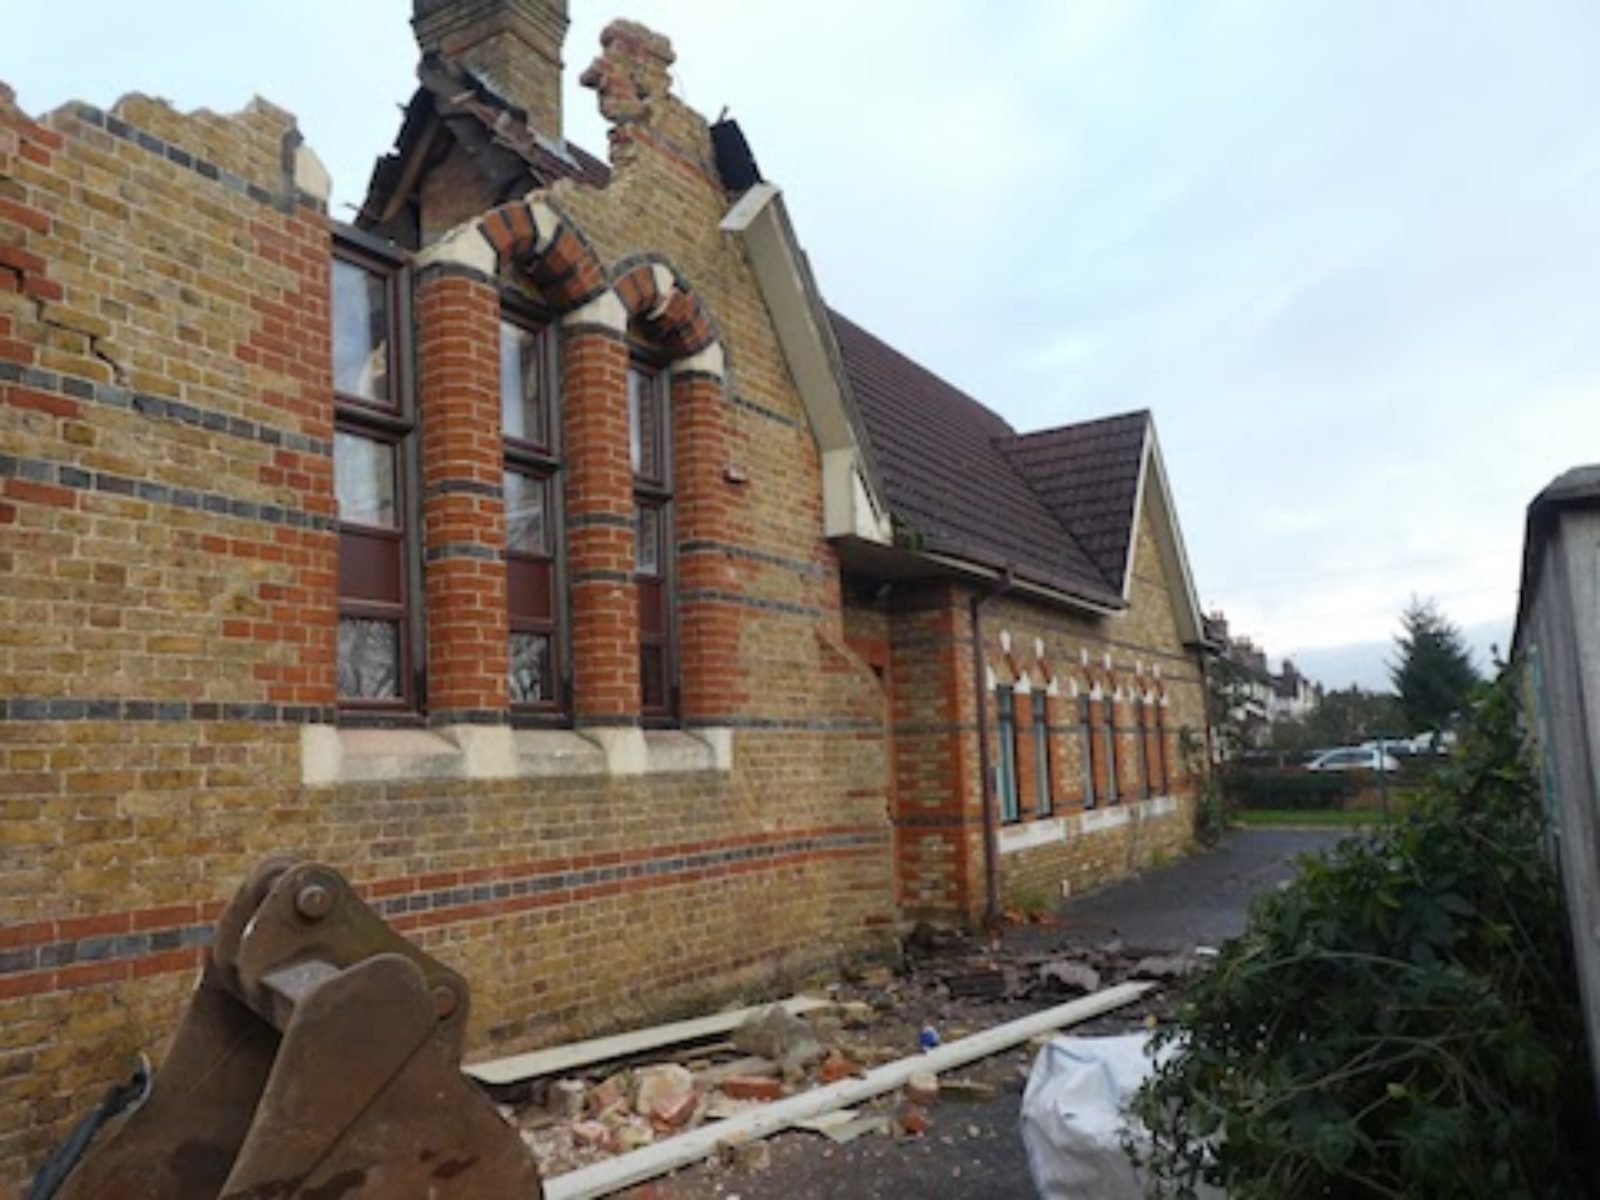 The Old School House being demolished, December 2020. Picture by Cllr Angela Gunning